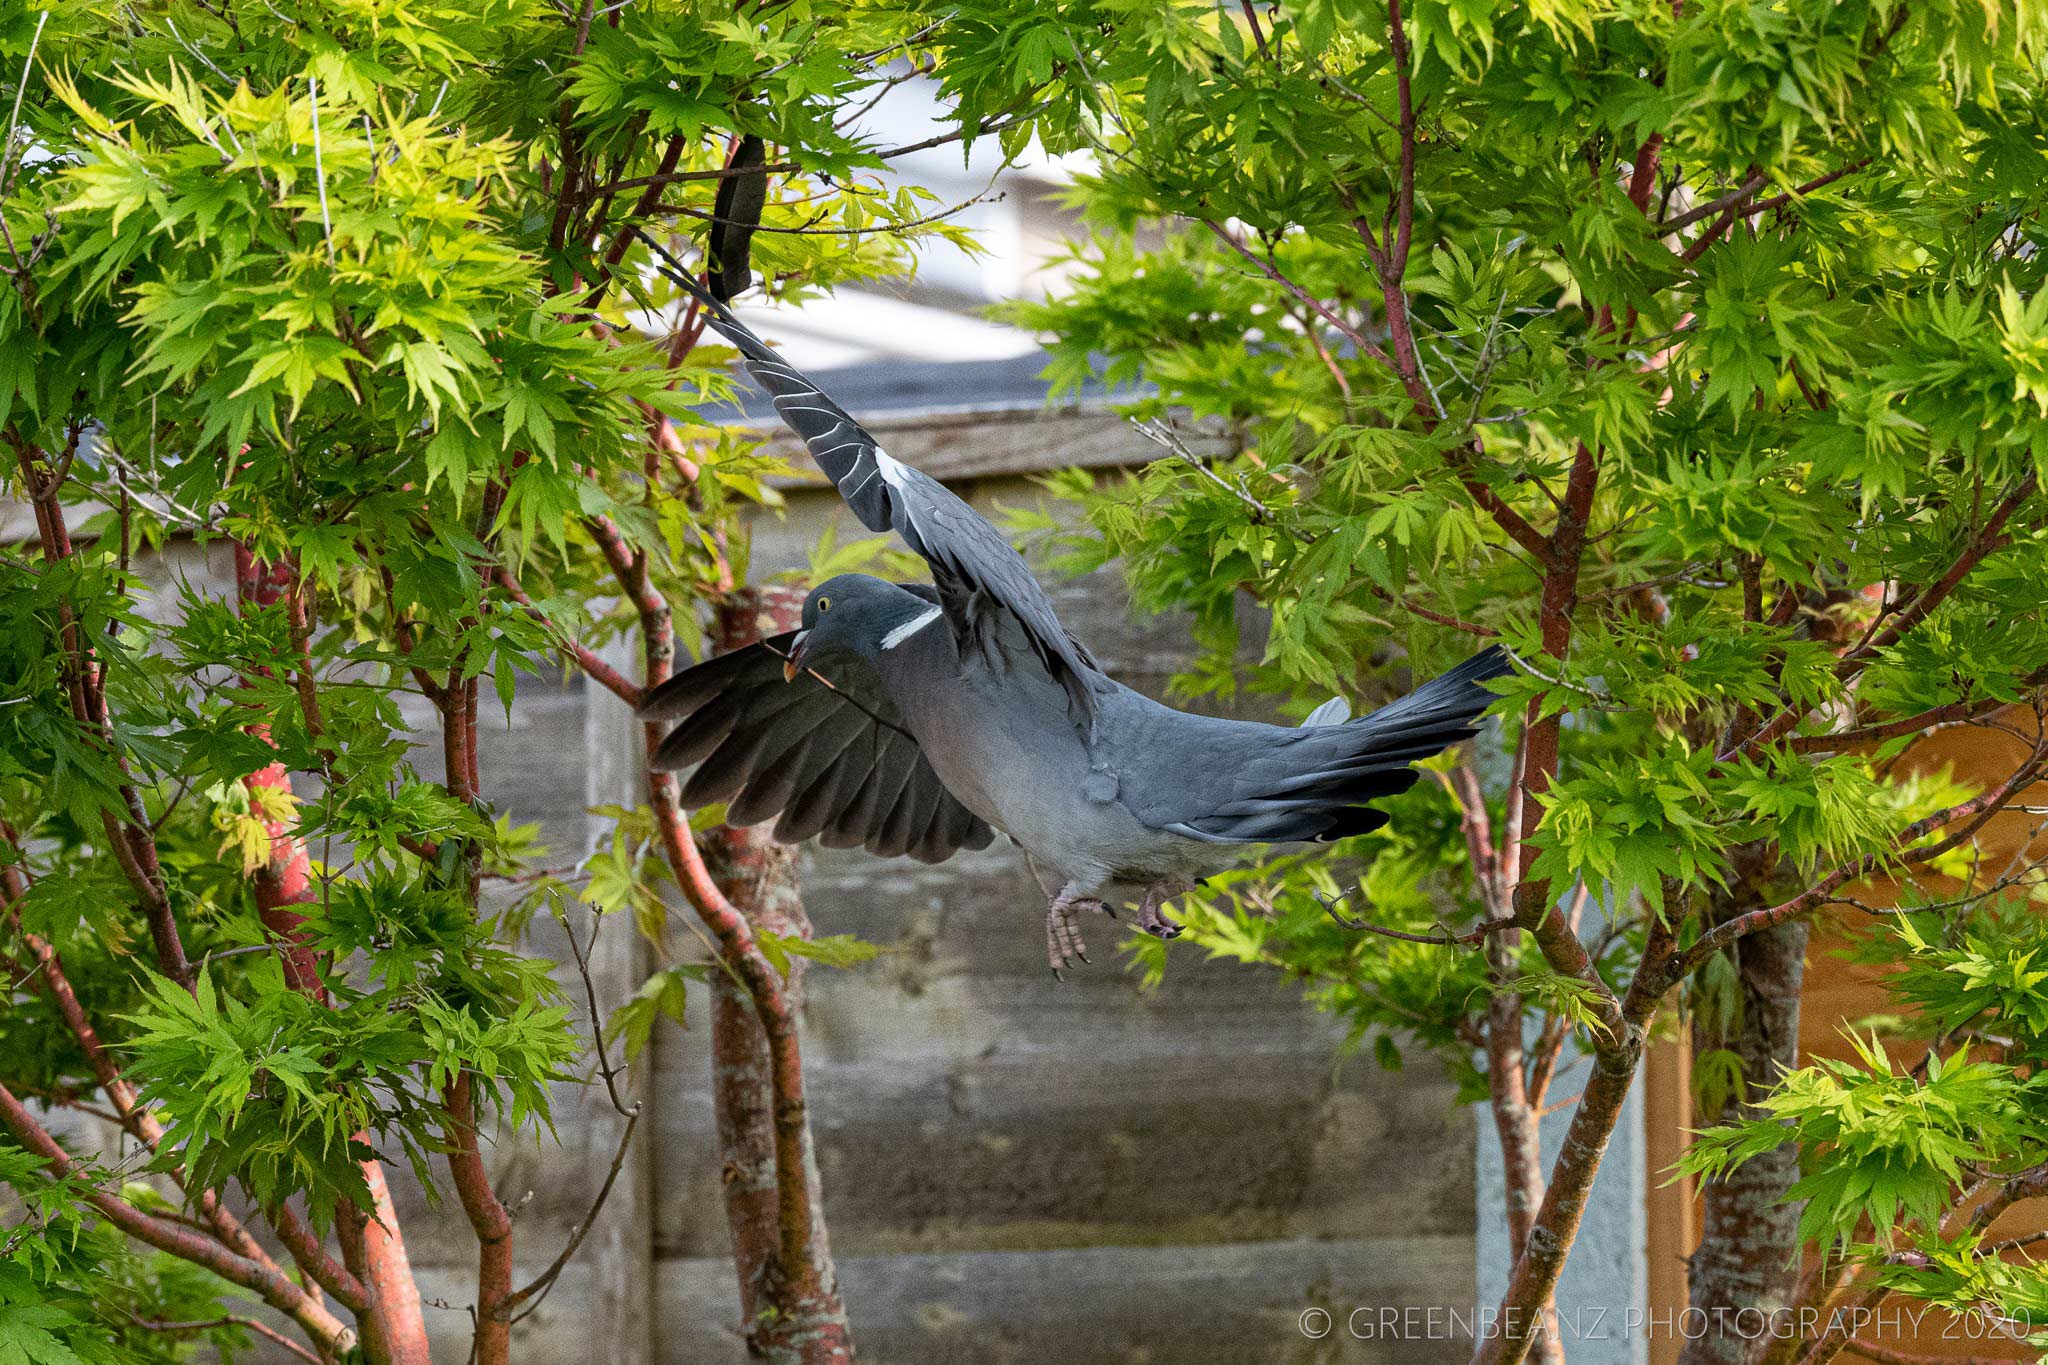 Pigeon in flight with nesting material April 2020